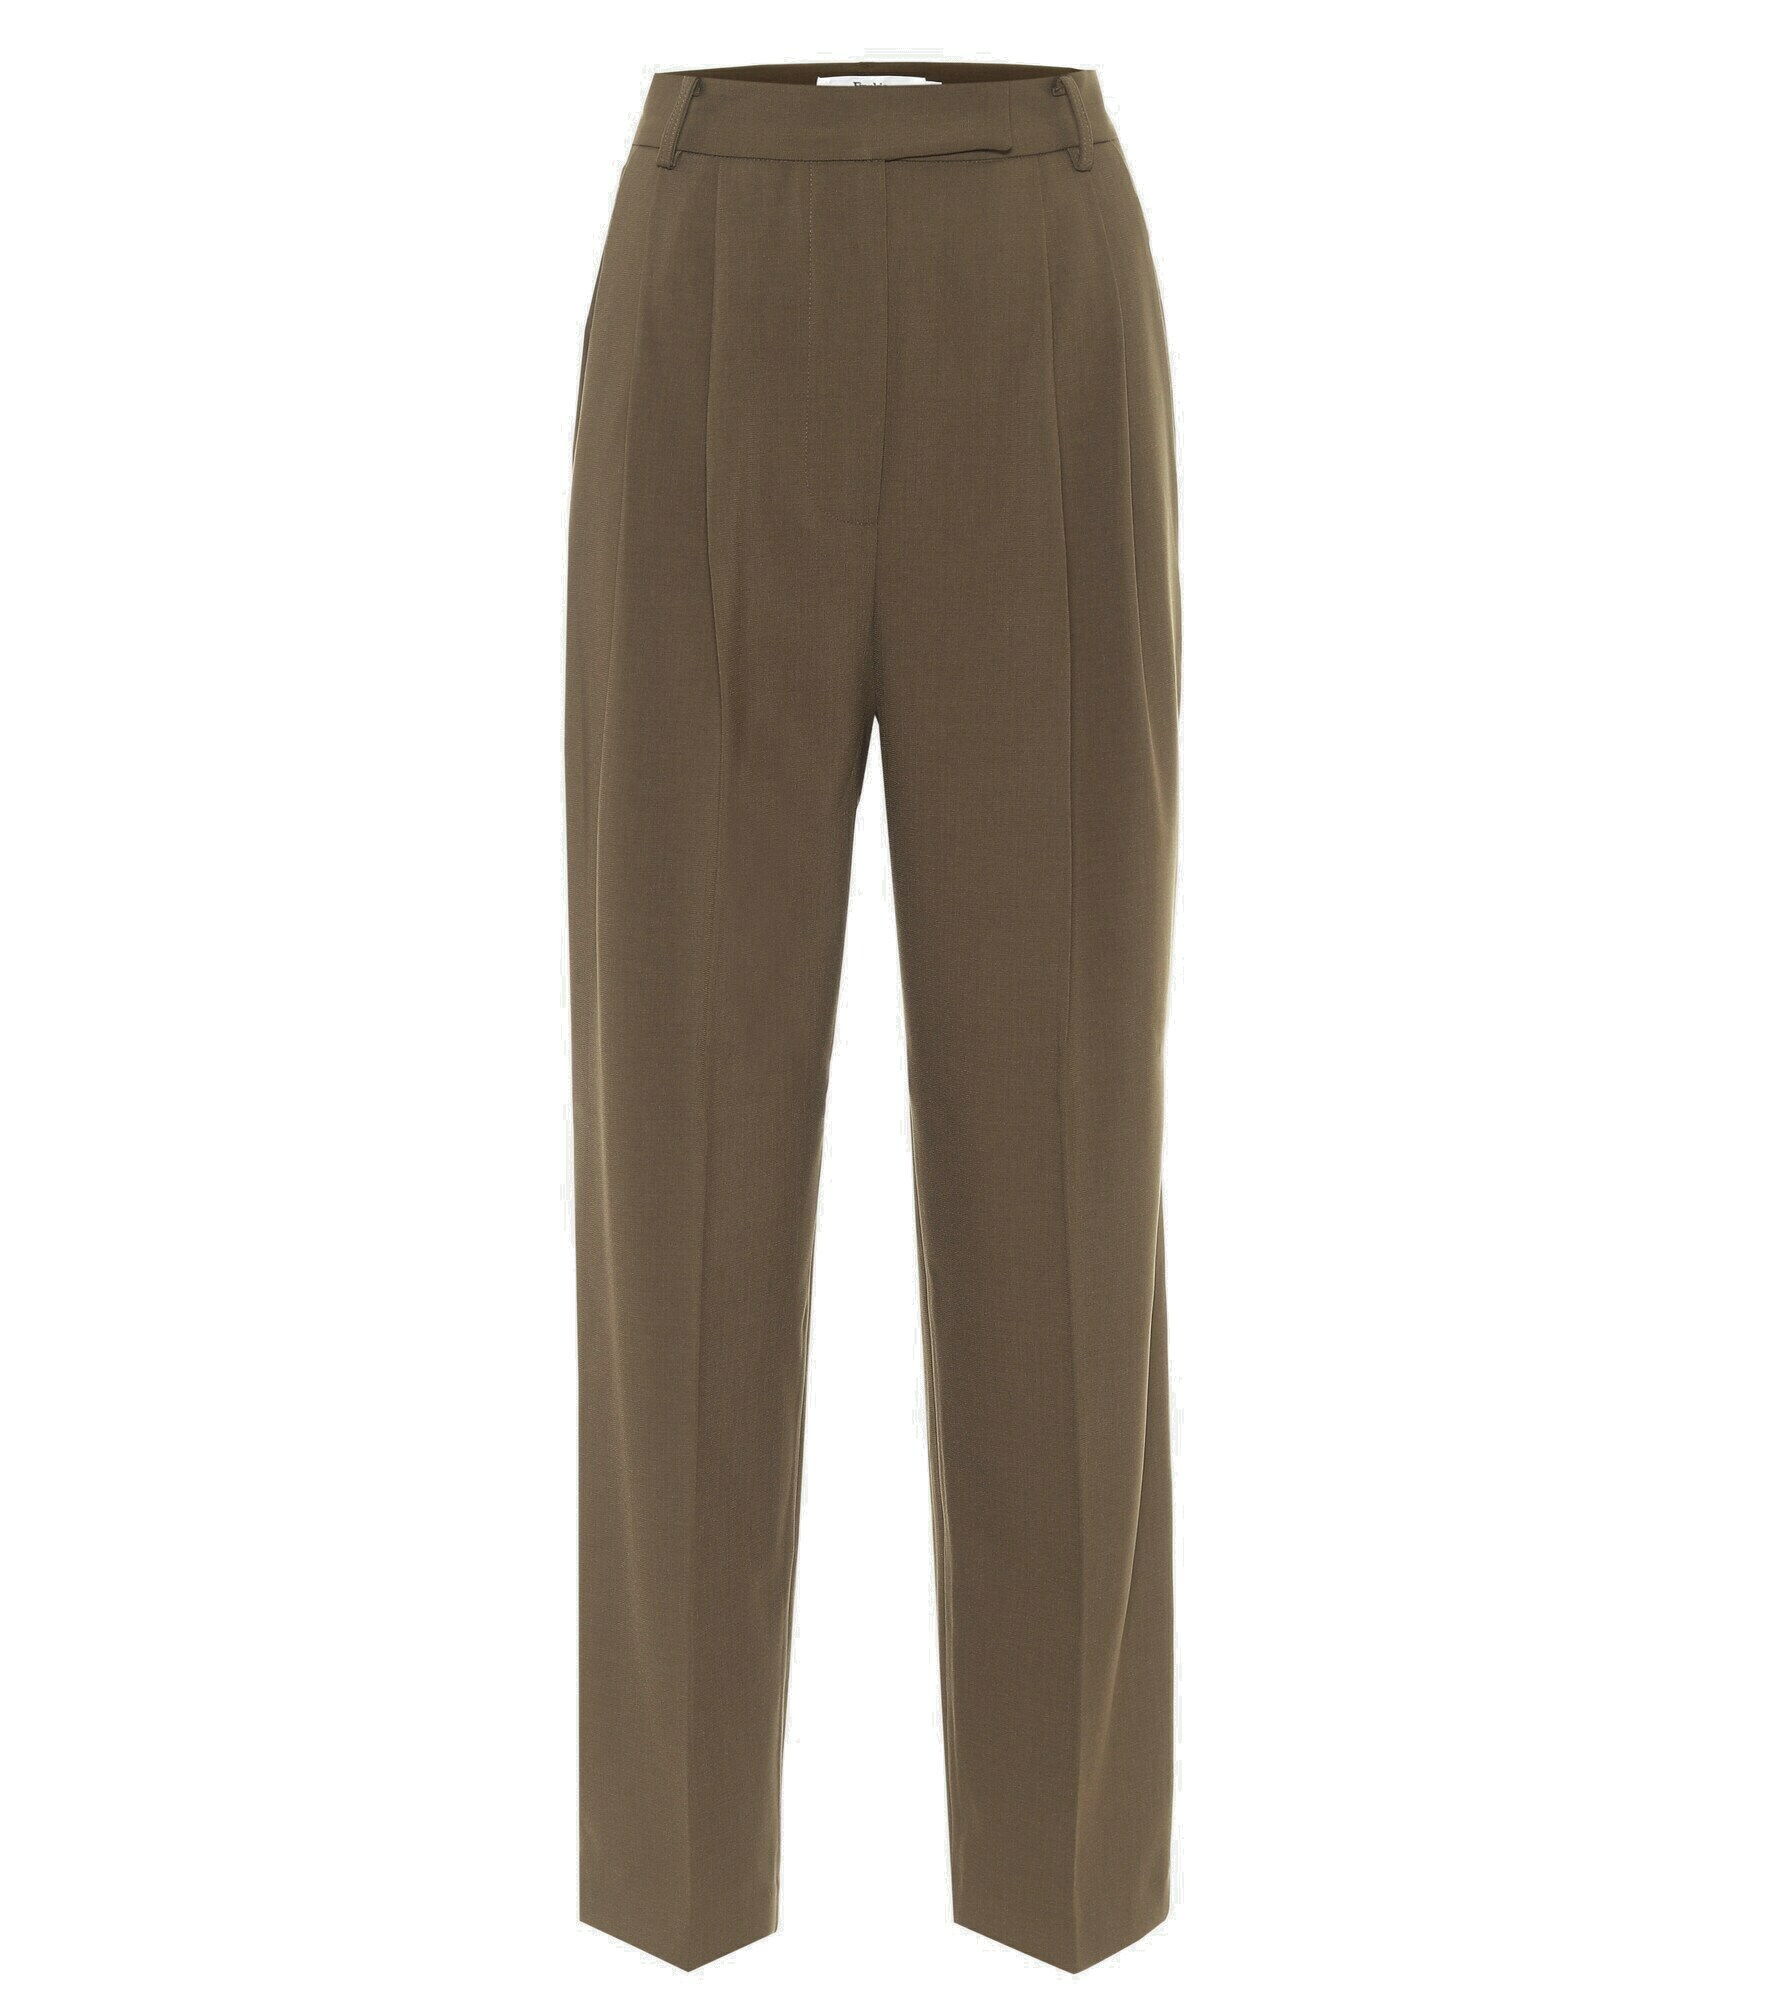 The Frankie Shop - Bea high-rise straight pants The Frankie Shop